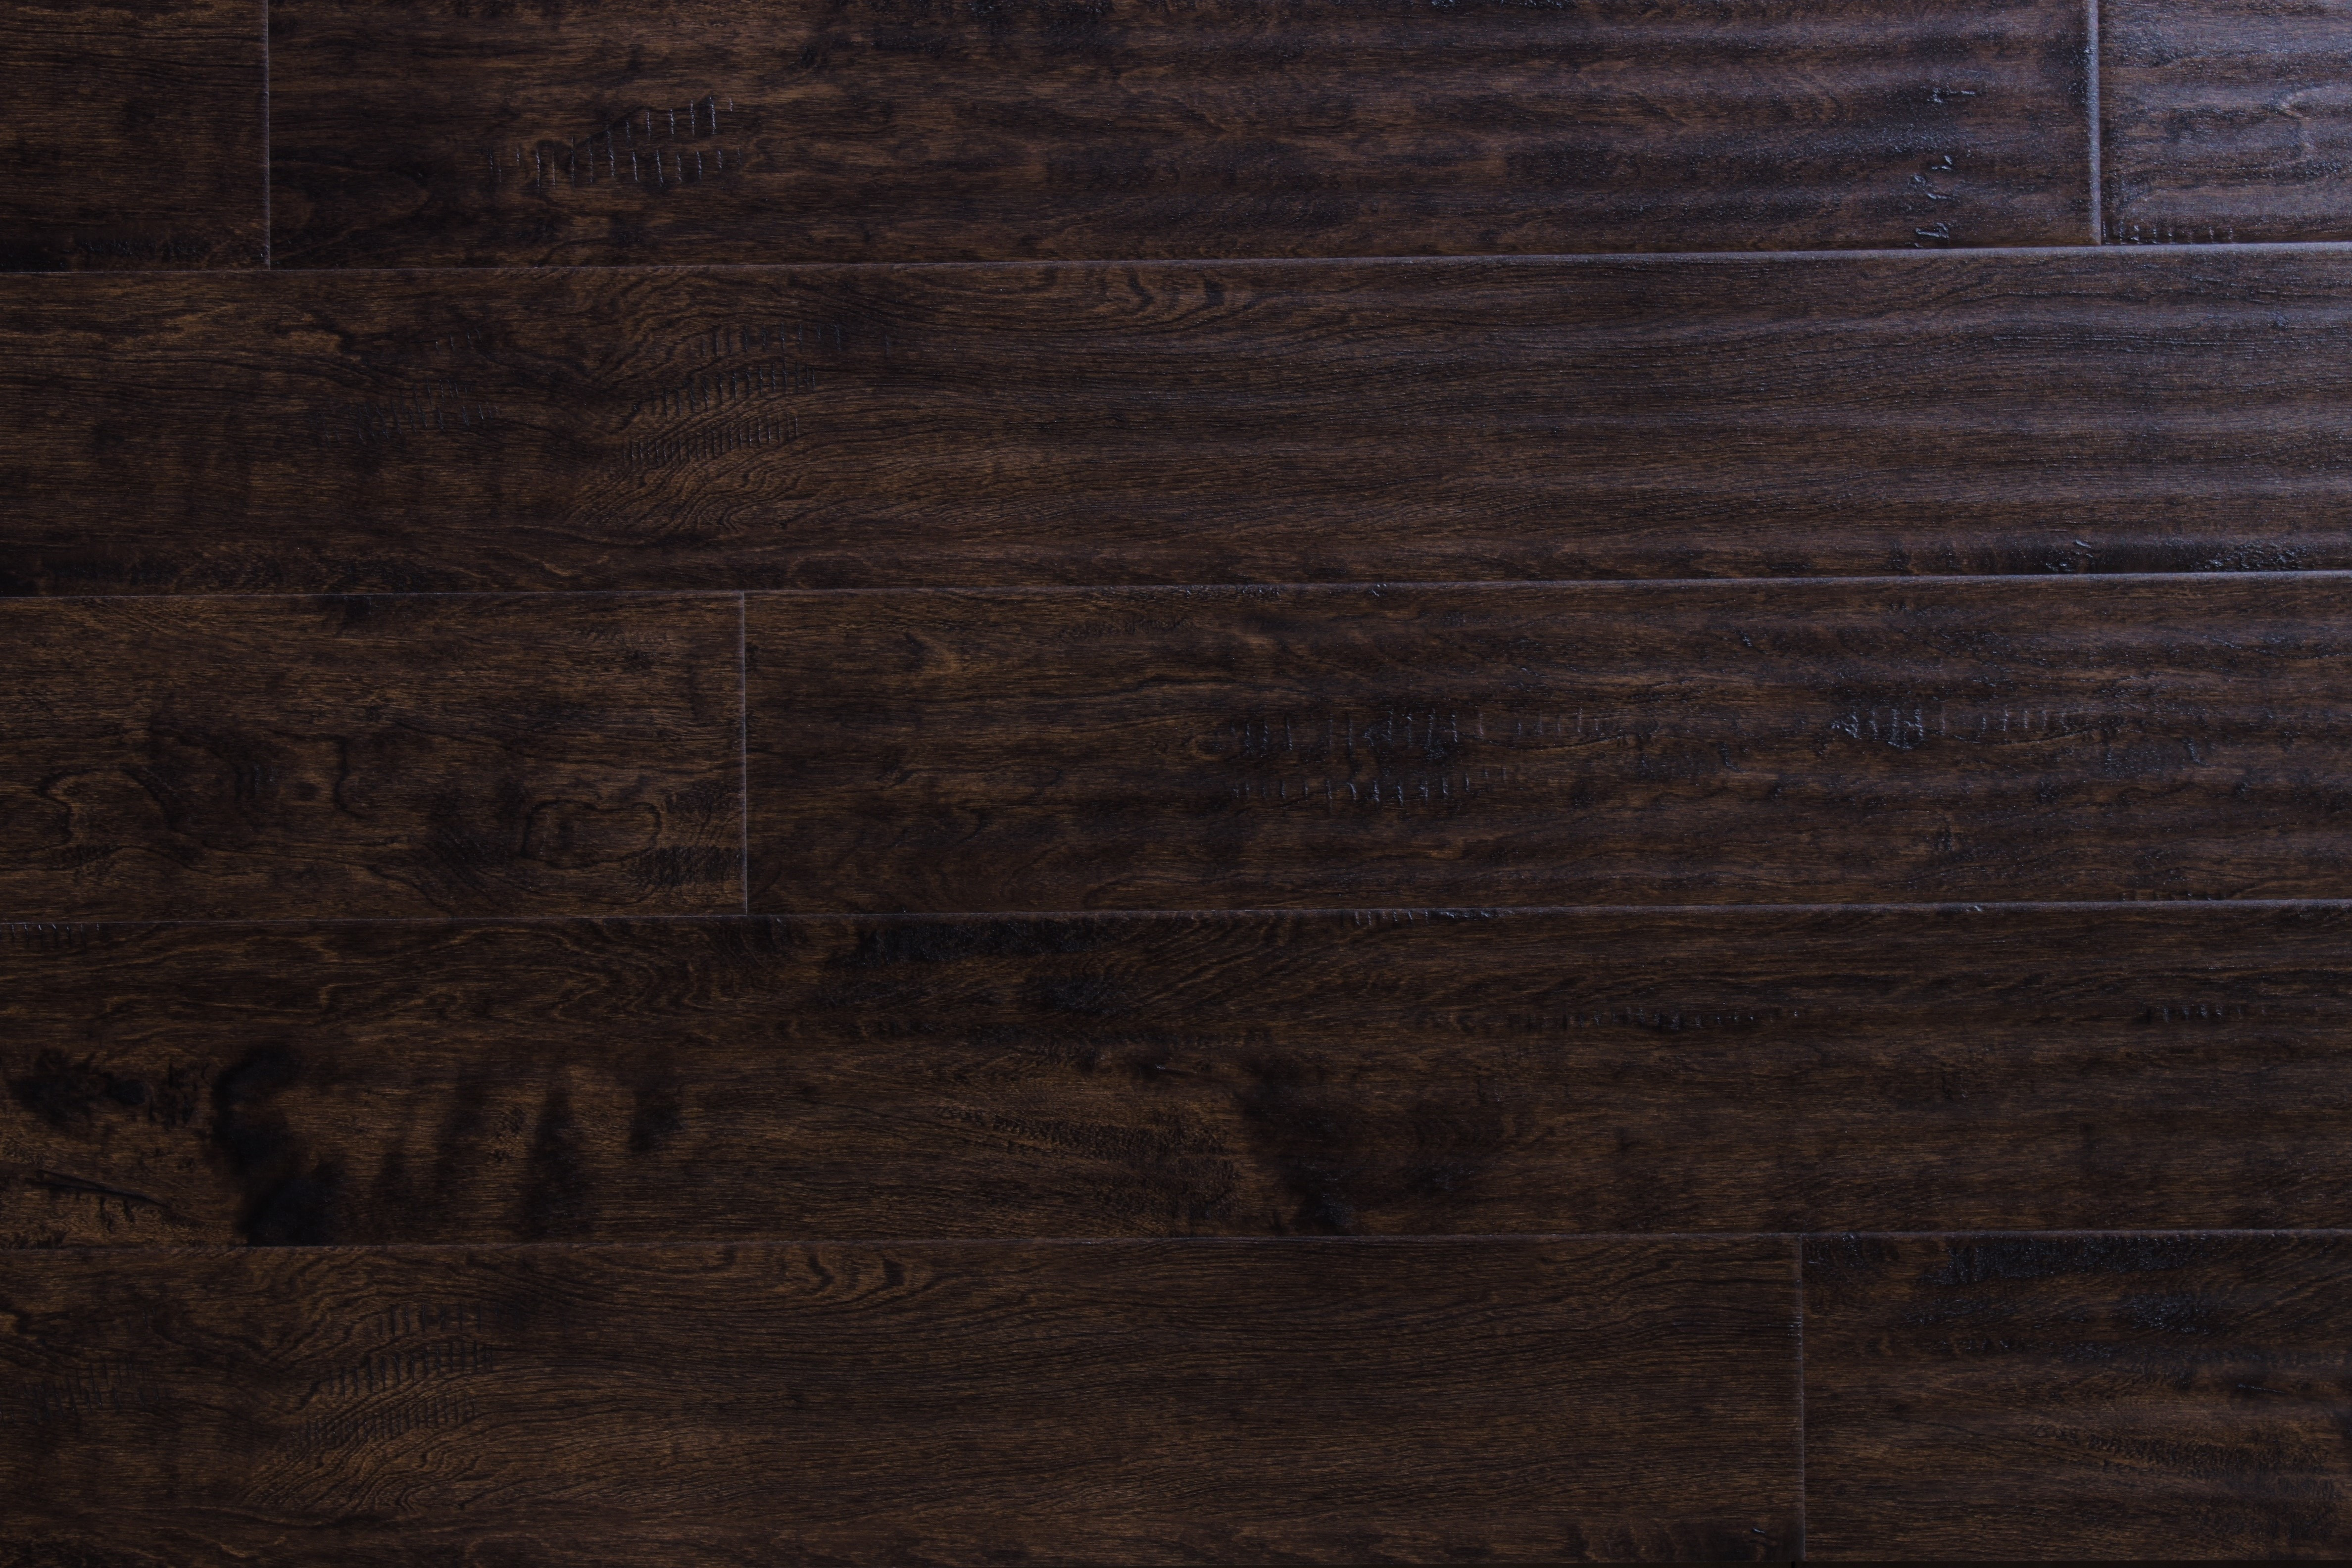 22 Amazing Hardwood Flooring On Concrete Floor 2024 free download hardwood flooring on concrete floor of wood flooring free samples available at builddirecta with tailor multi gb 5874277bb8d3c